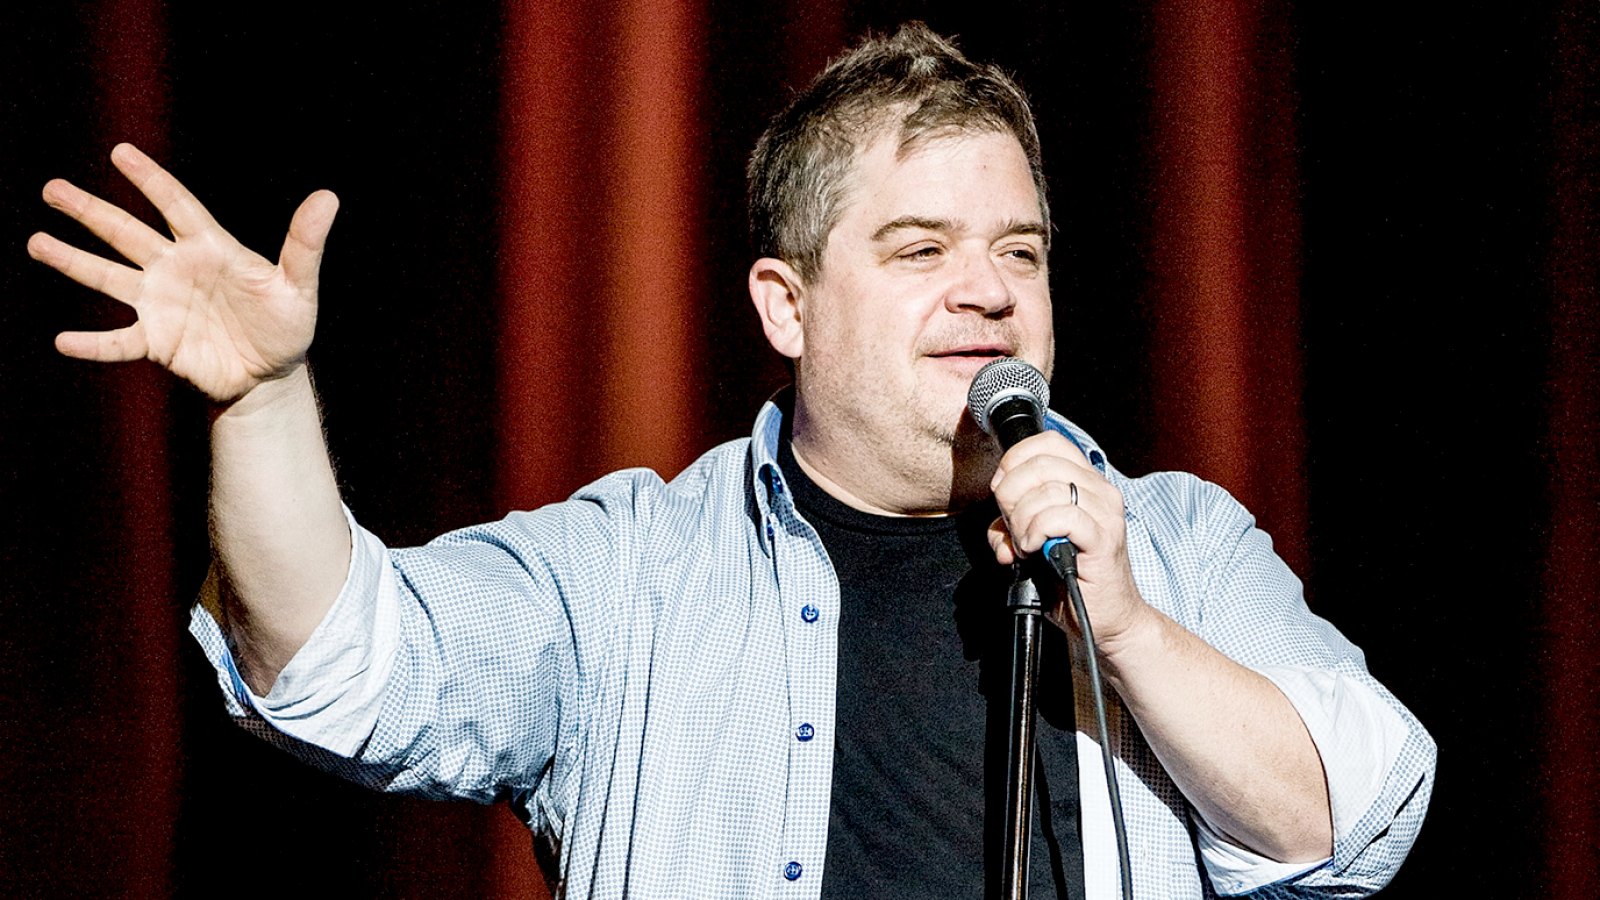 Patton Oswalt performs during Festival Supreme 2016 at The Shrine Expo Hall on October 29, 2016 in Los Angeles, California.